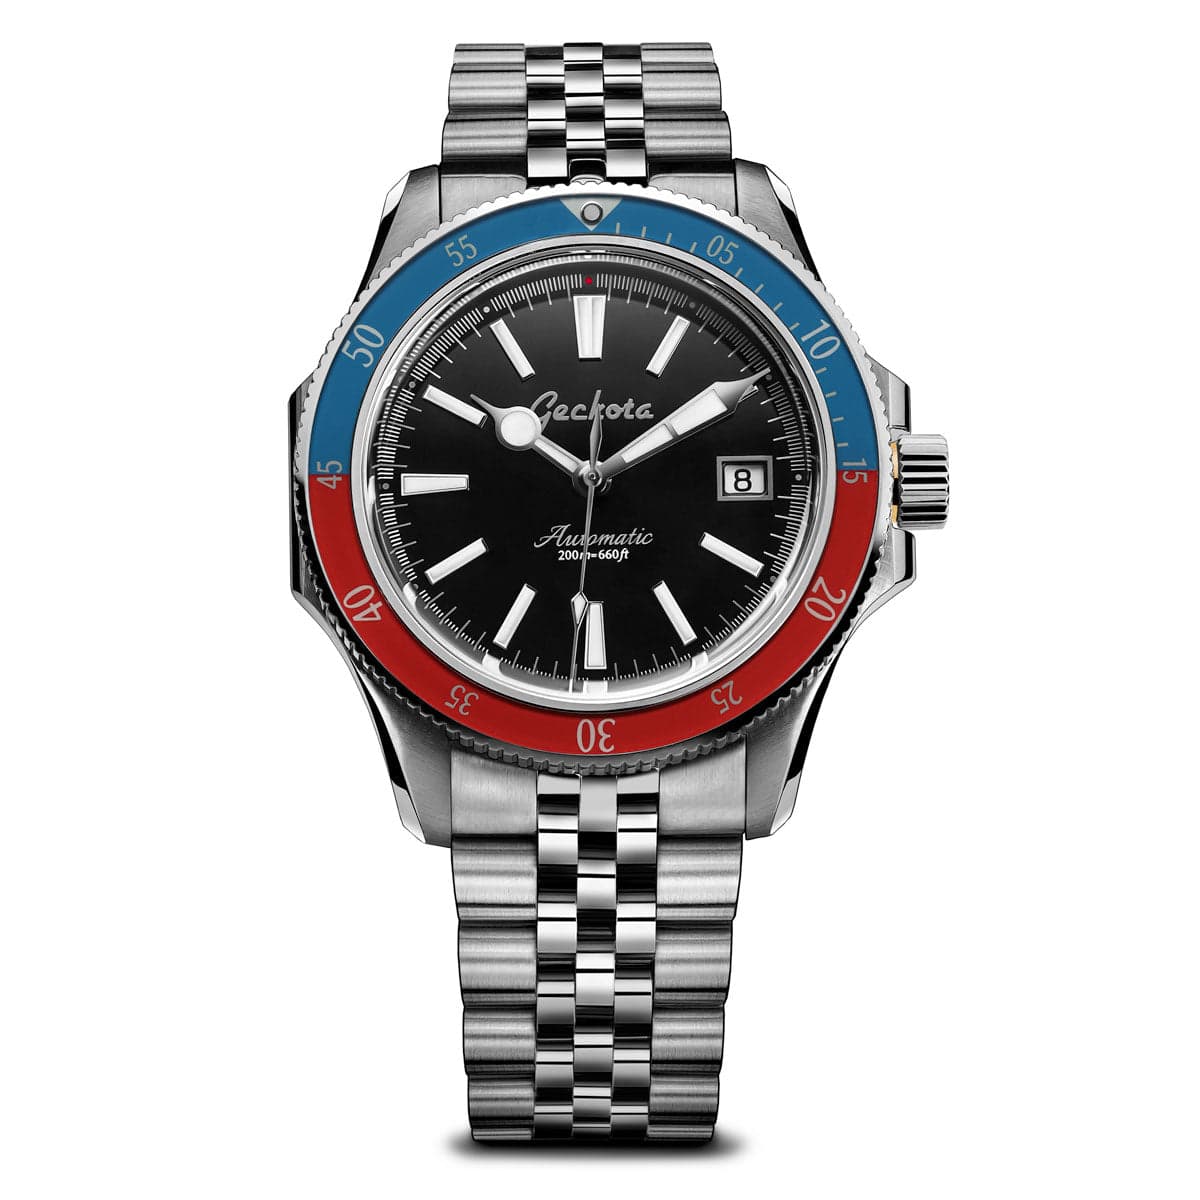 Geckota Sea Hunter Automatic Diver's Watch - Blue / Red - NEARLY NEW